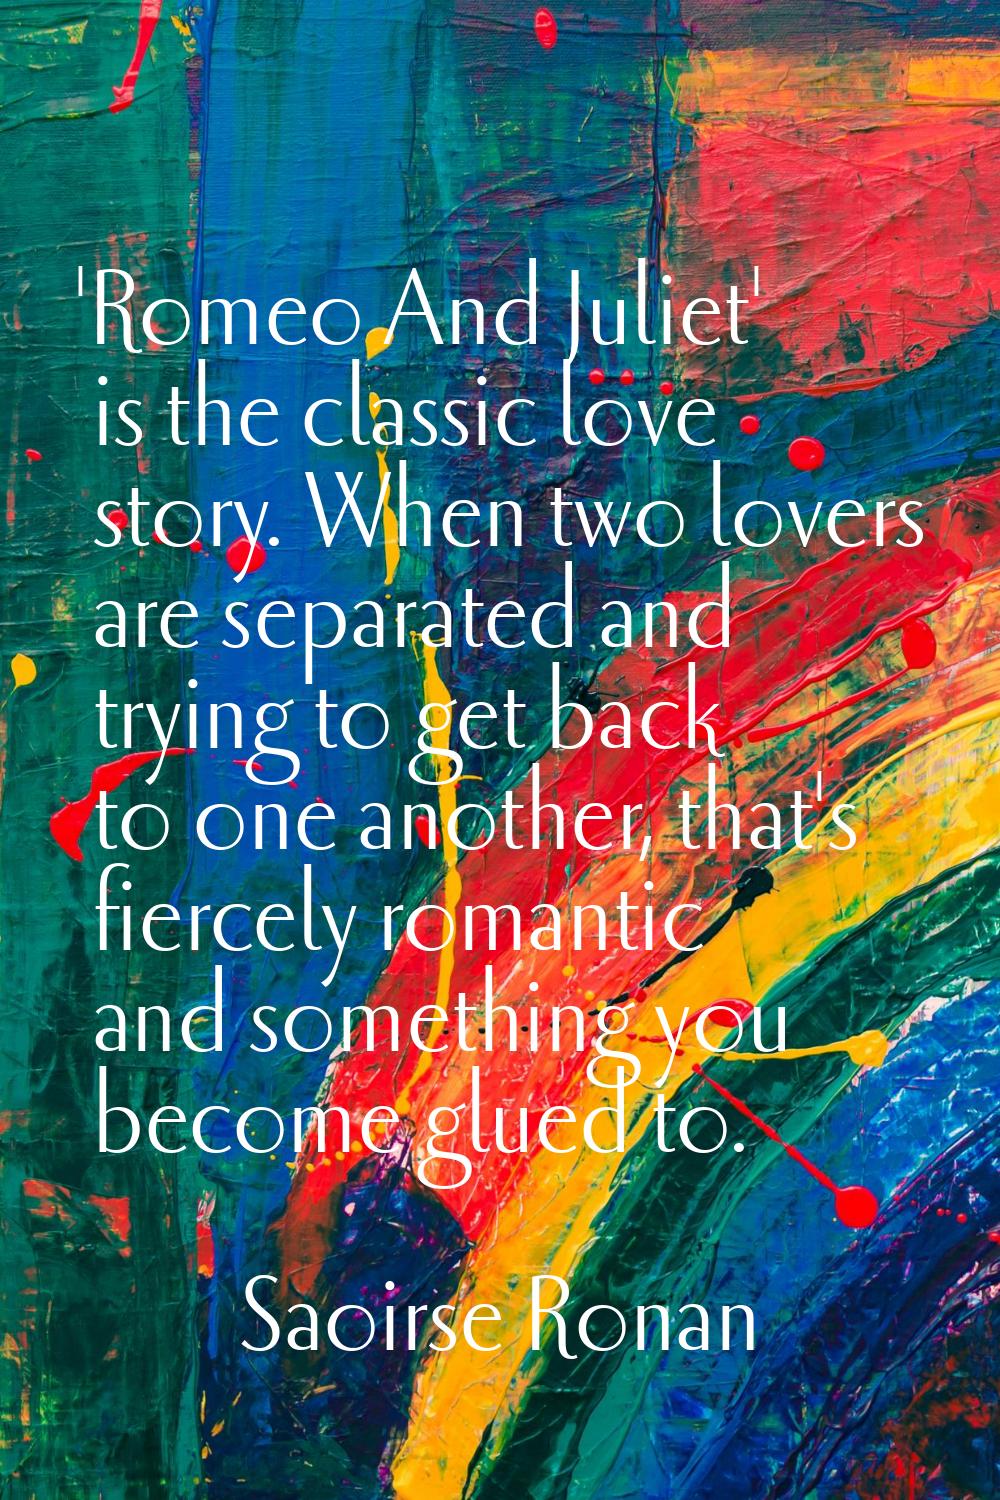 'Romeo And Juliet' is the classic love story. When two lovers are separated and trying to get back 